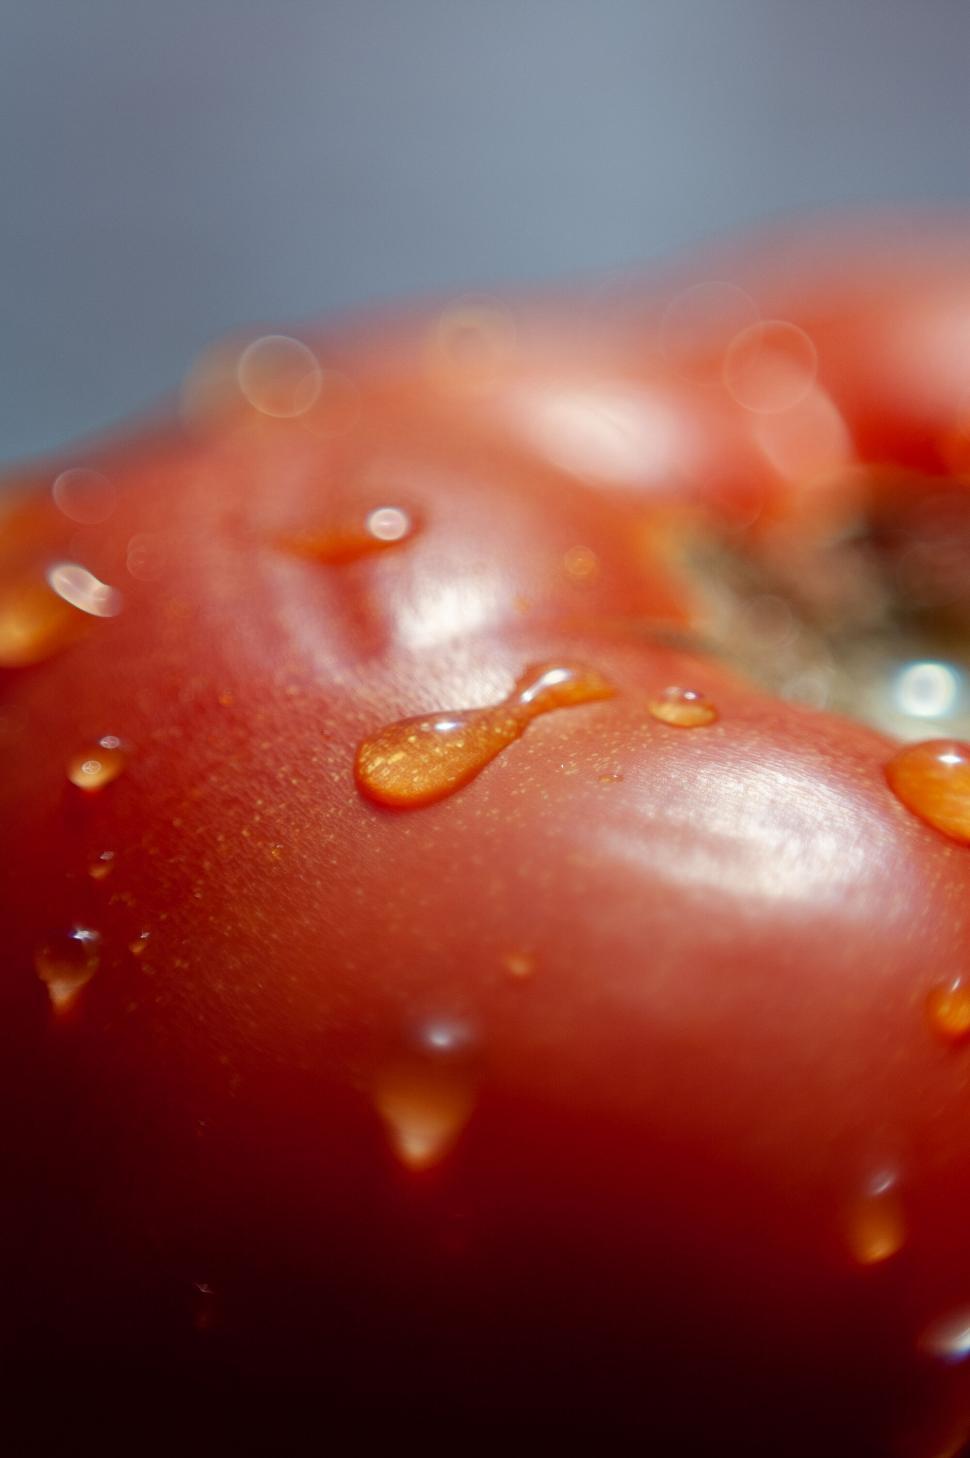 Free Image of Juicy red tomato with water droplets close-up 